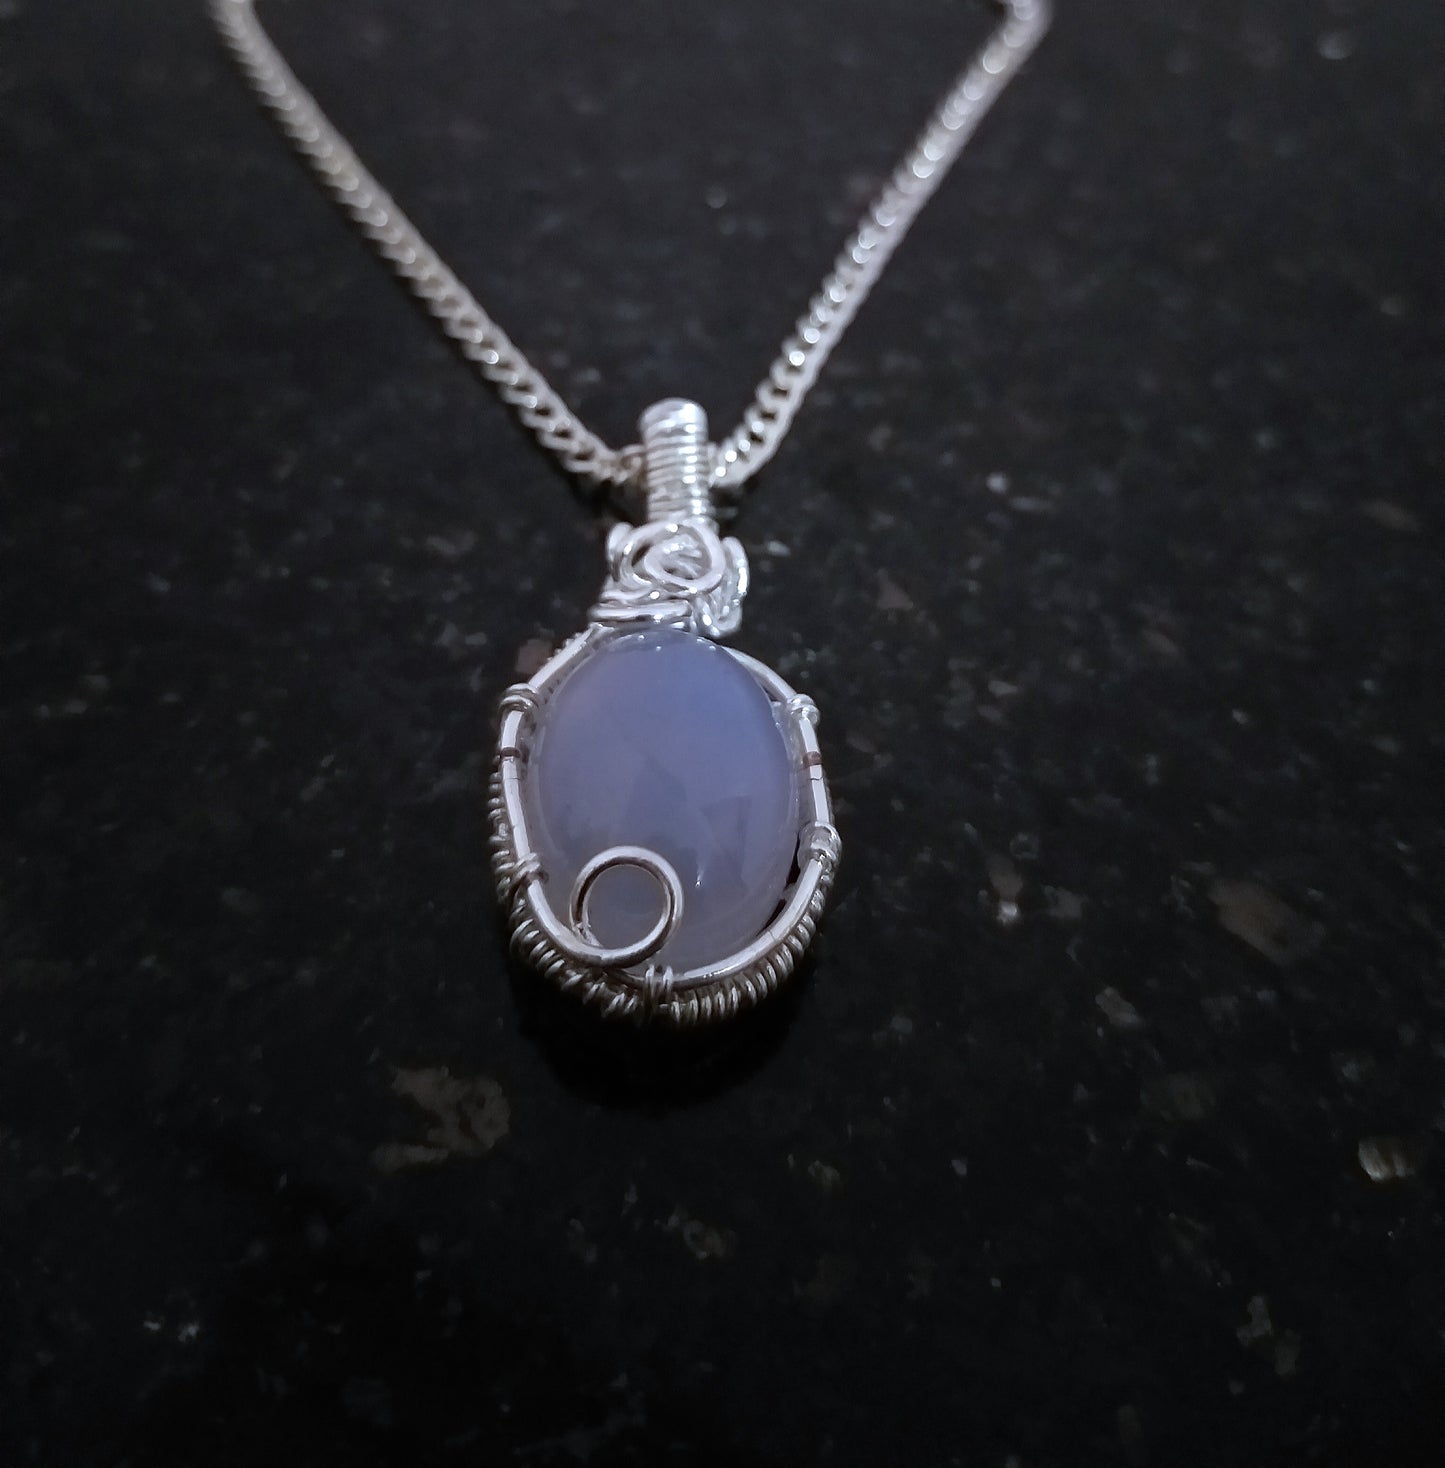 Natural Oval Chalcedony Pendant, Blue Cabochon Gemstone Necklace